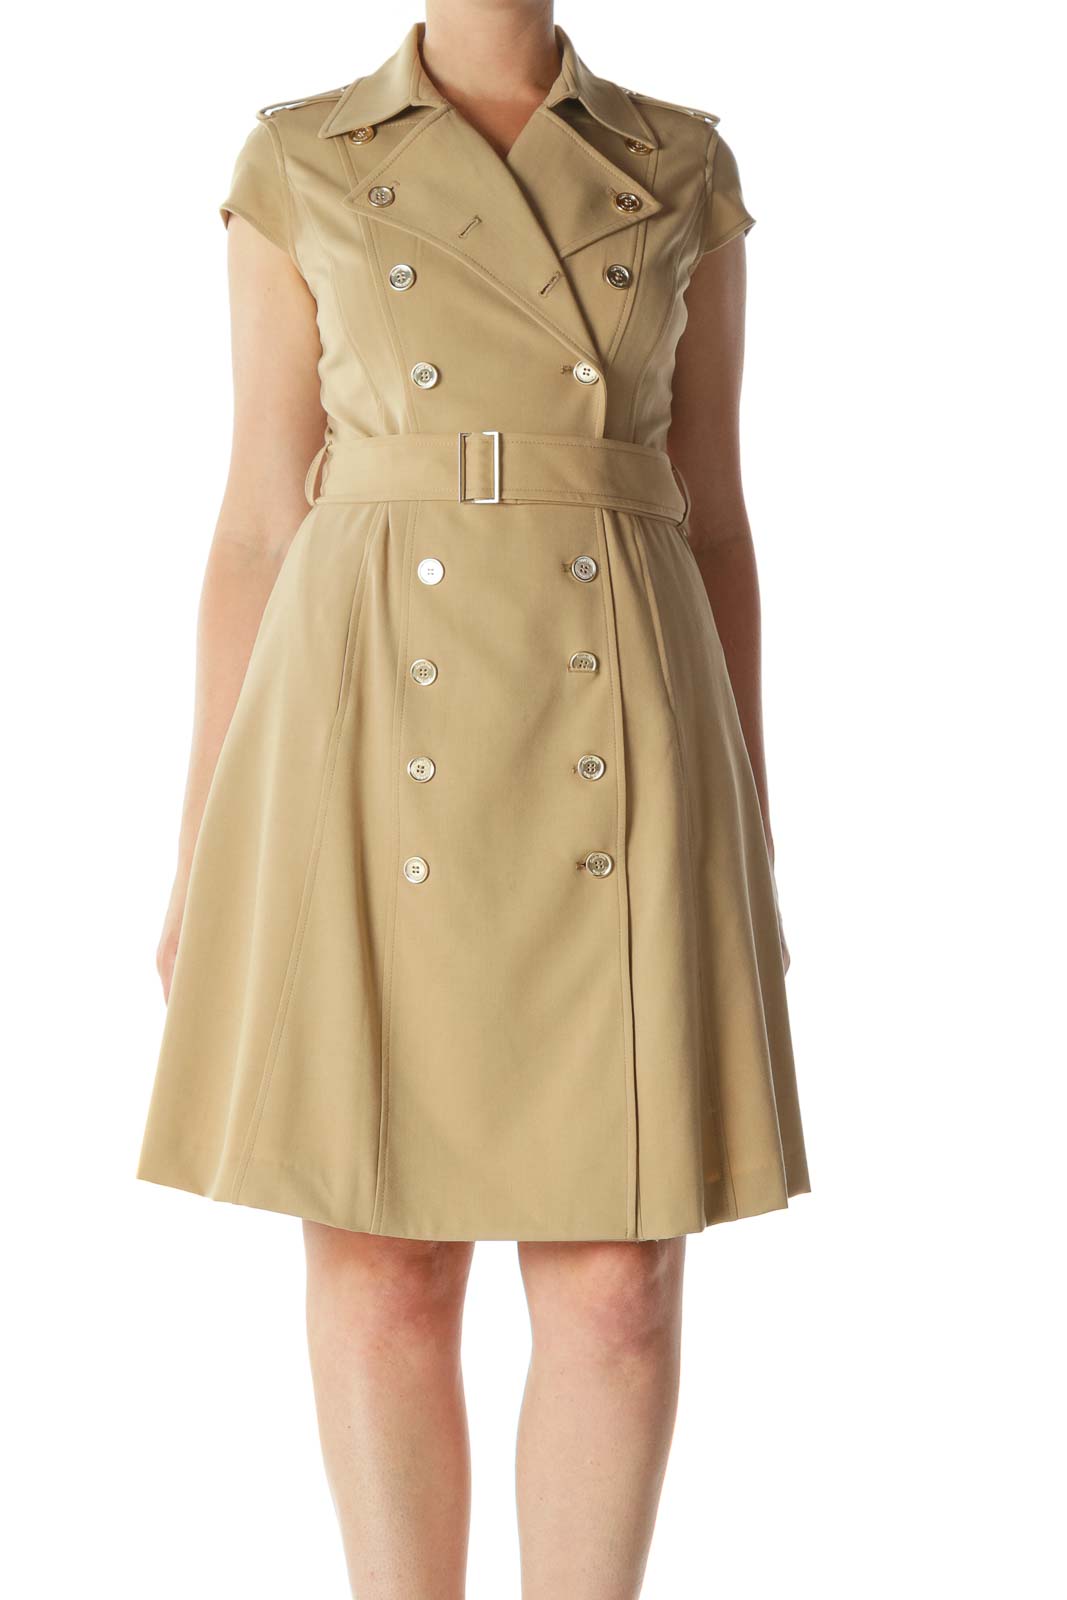 Beige Double-Breasted Buttoned Cap-Sleeves Dress Front